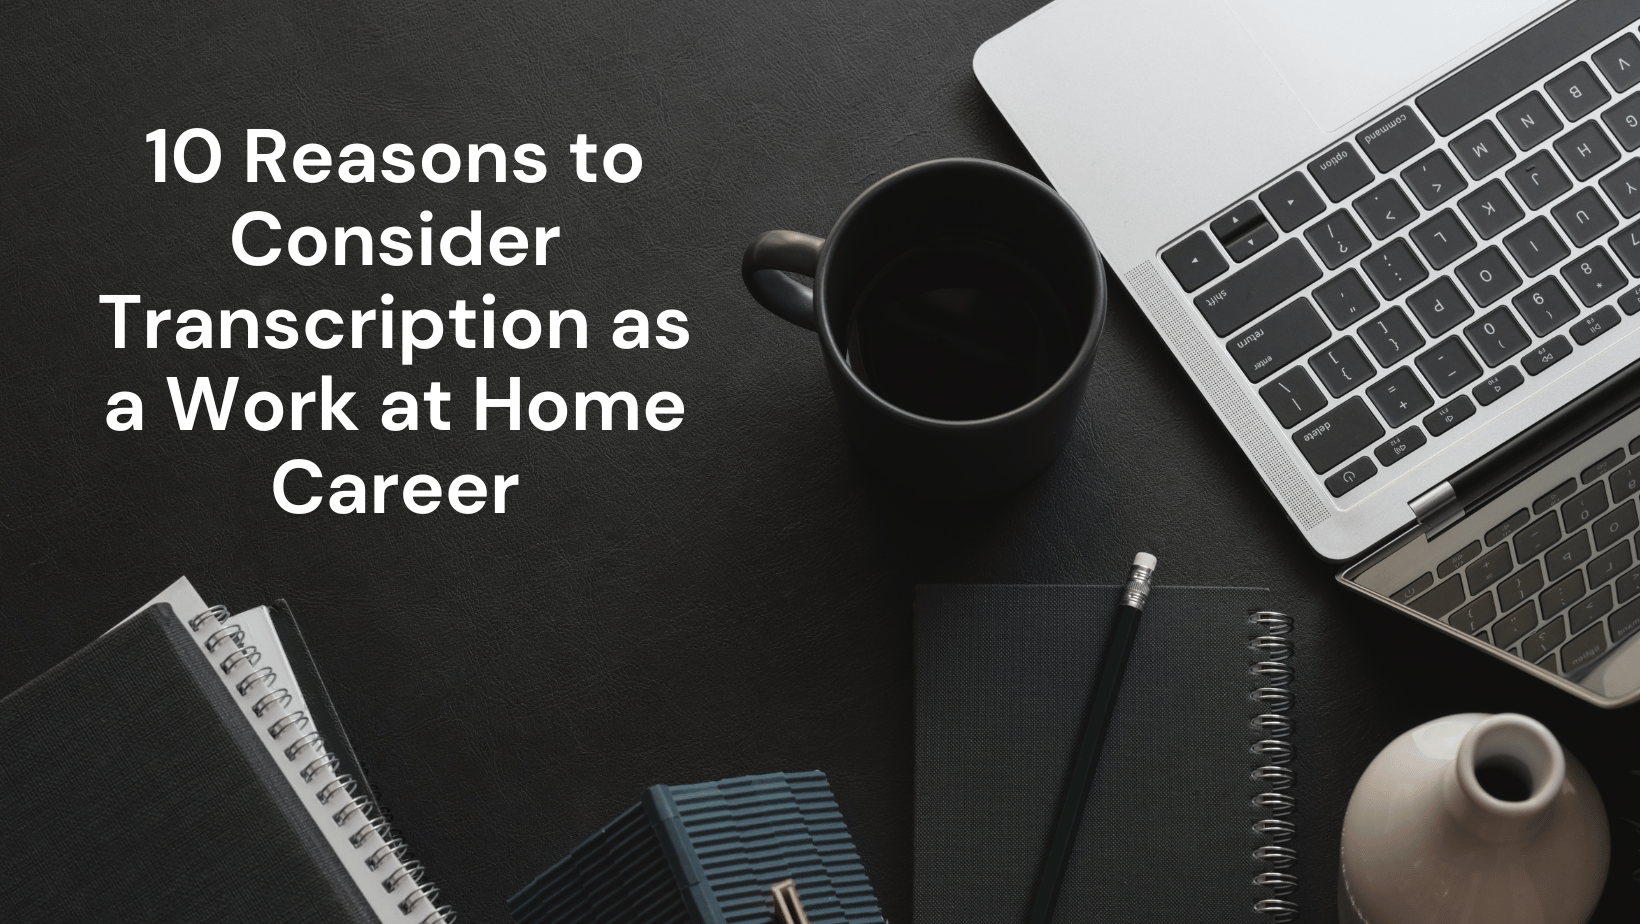 10 reasons to consider transcription as a work at home career